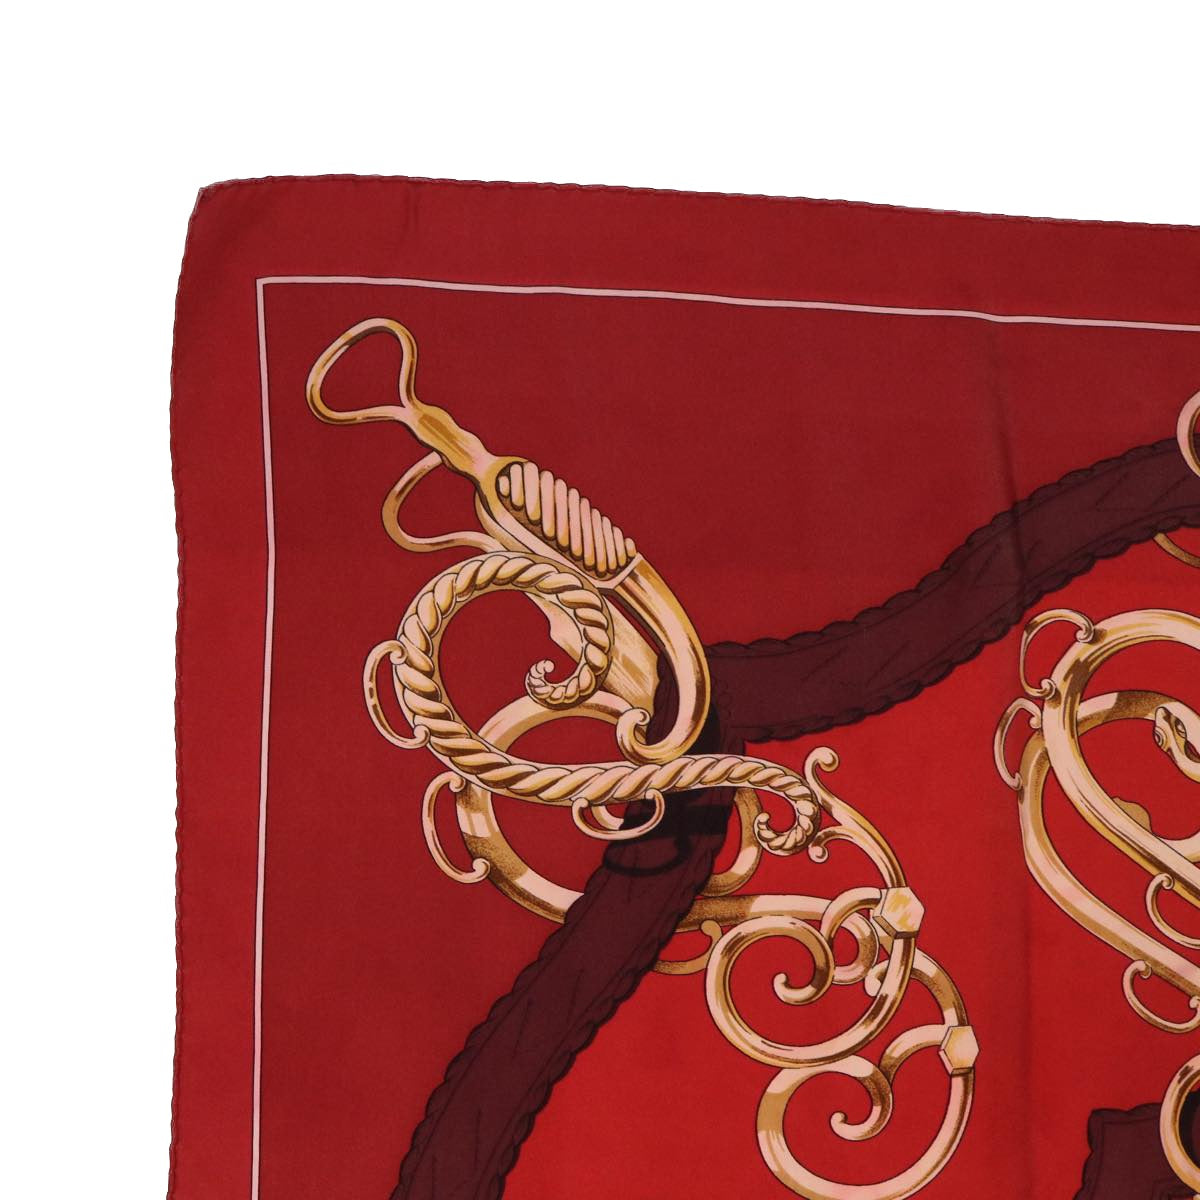 HERMES Carre 90 SPRINGS Scarf Silk Red Auth bs7741